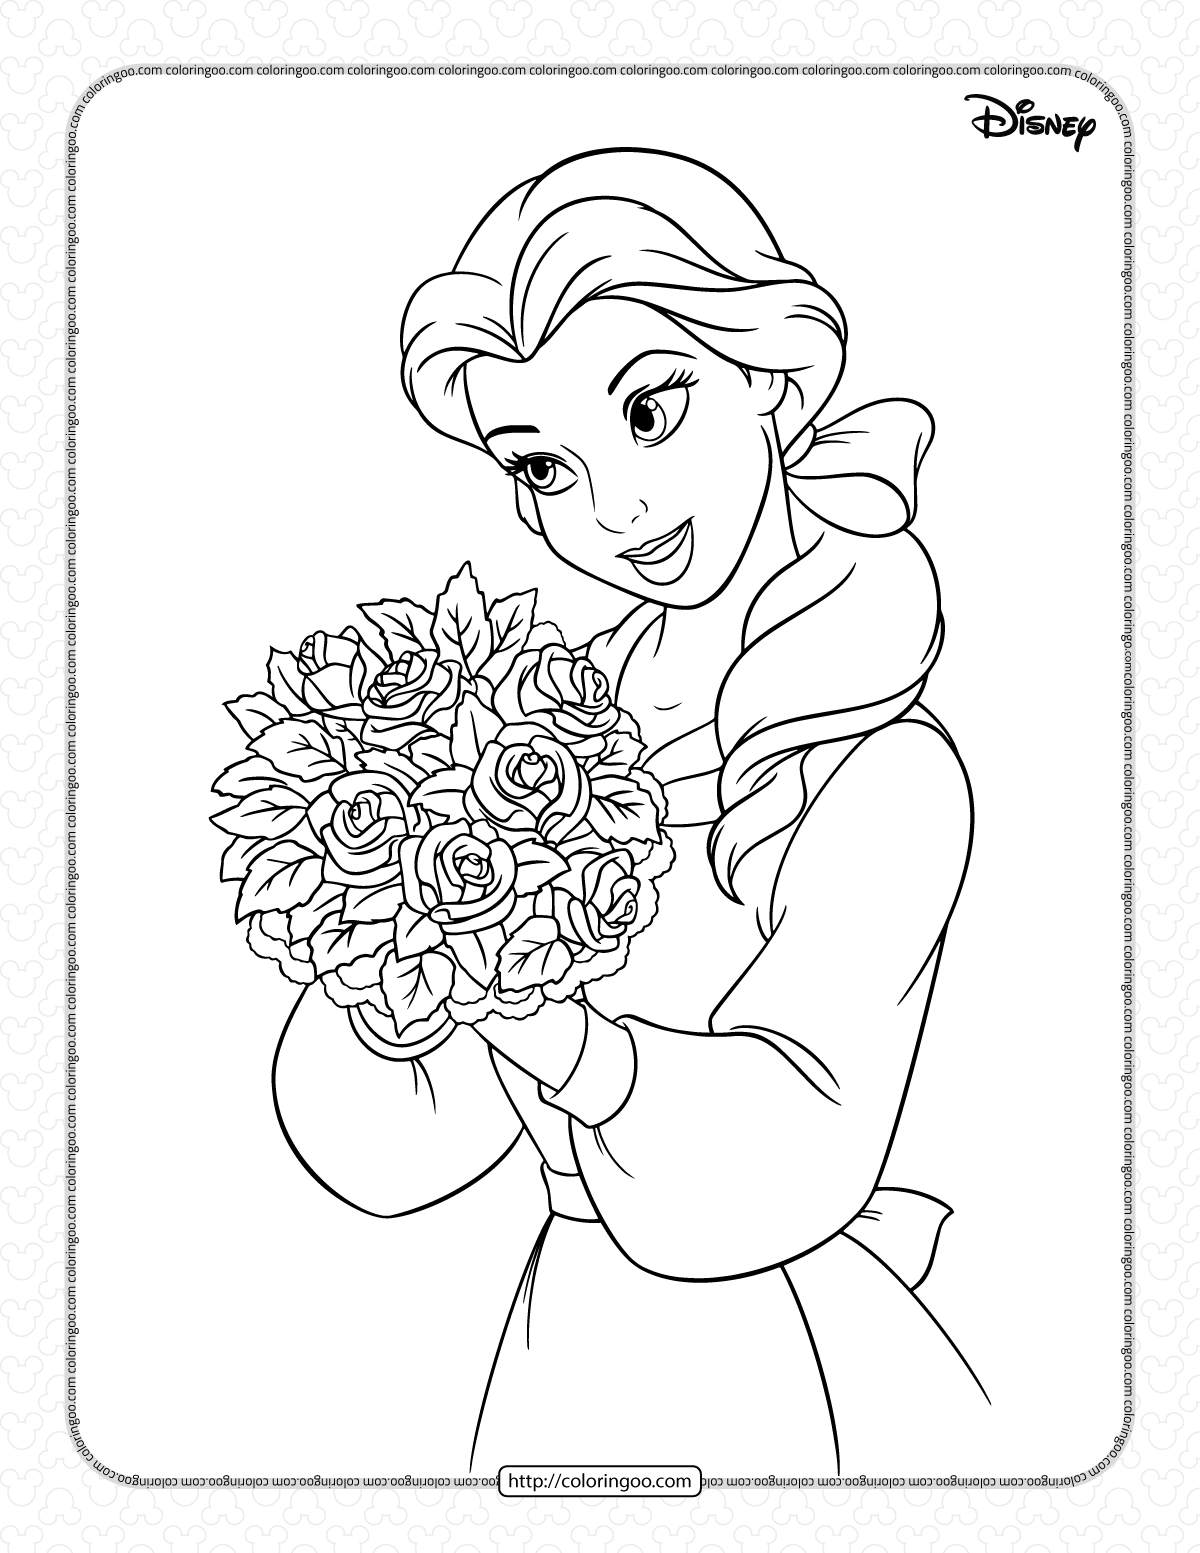 belle with a bouquet of roses coloring page